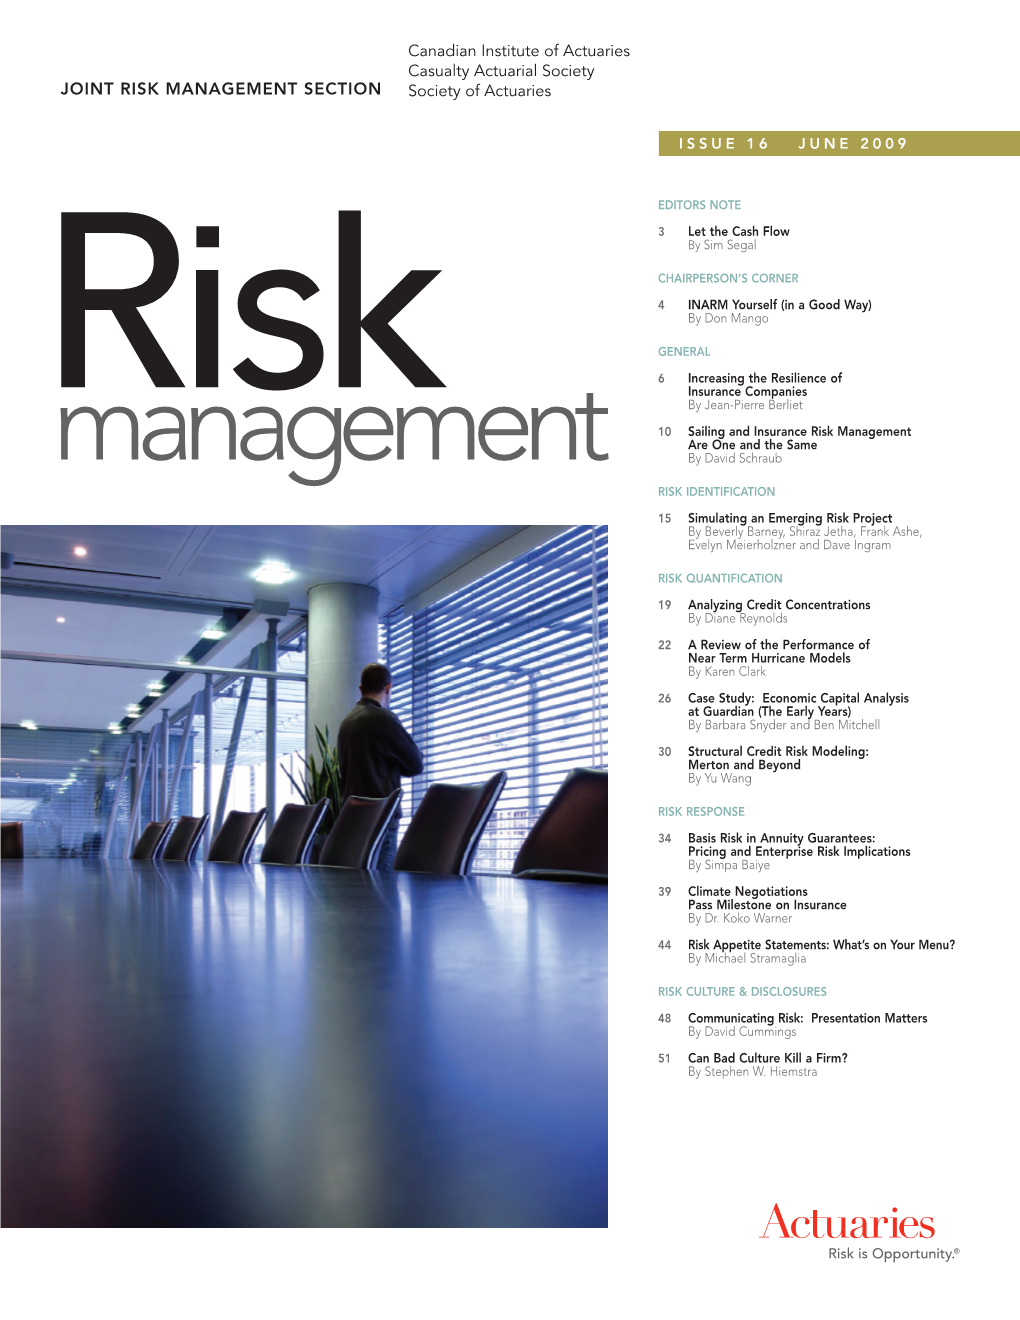 Joint Risk Management Issue 16, June 2009